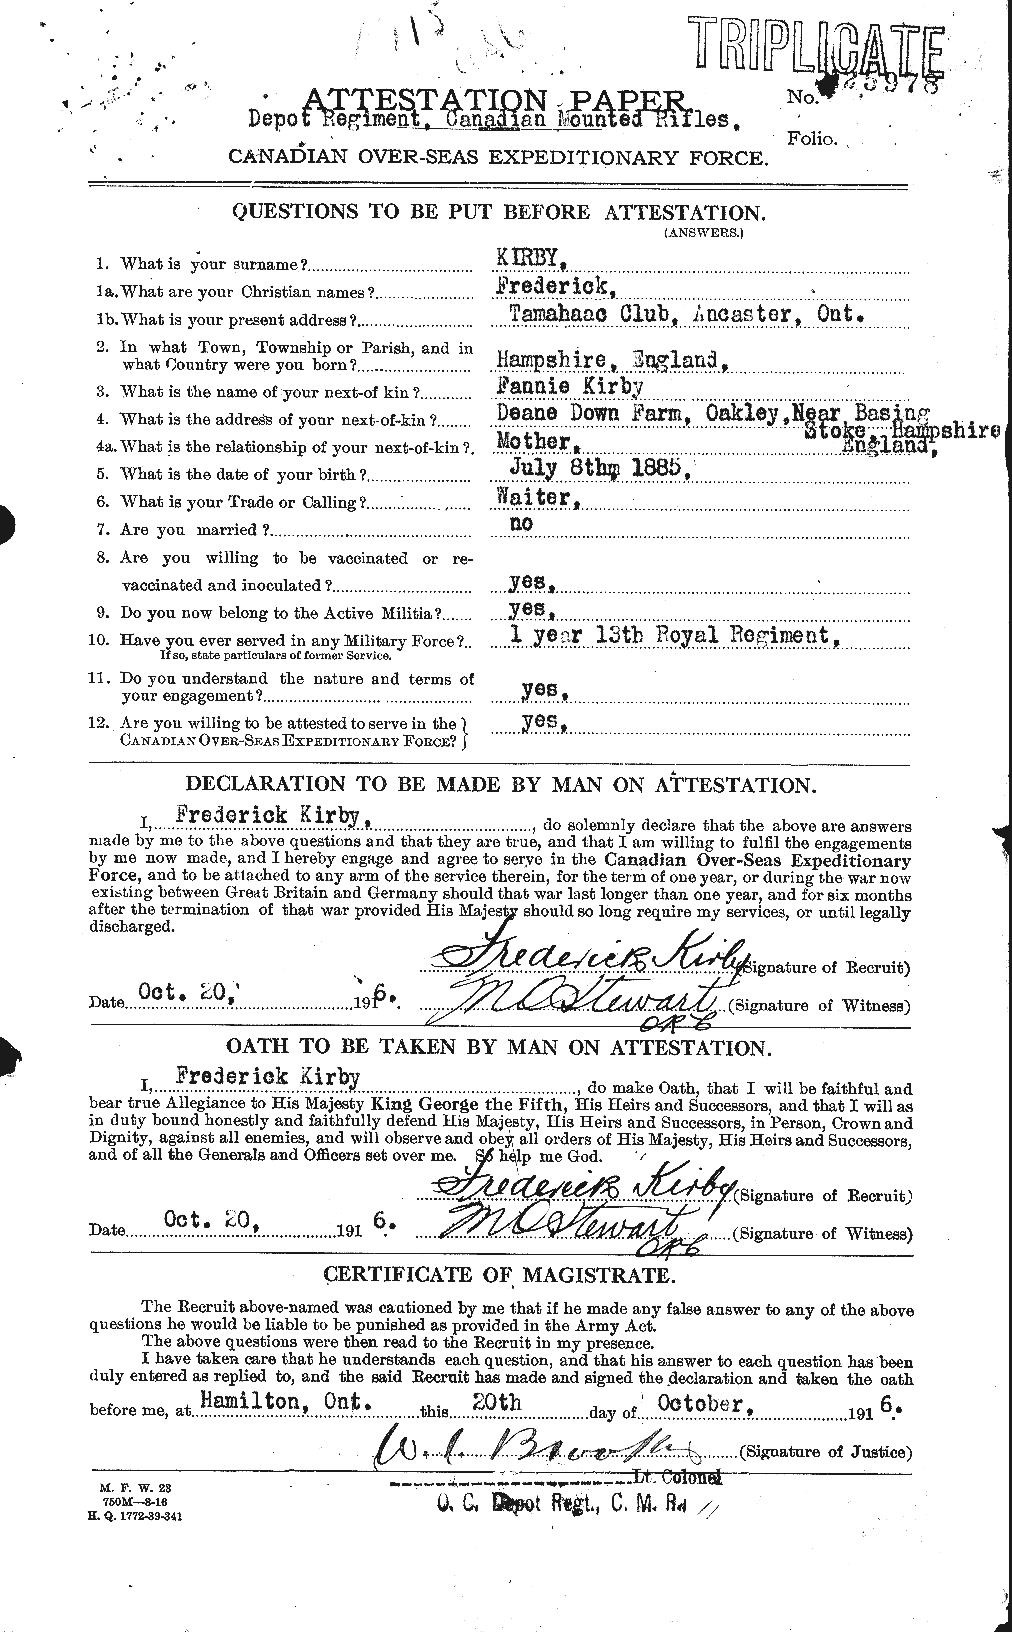 Personnel Records of the First World War - CEF 437190a